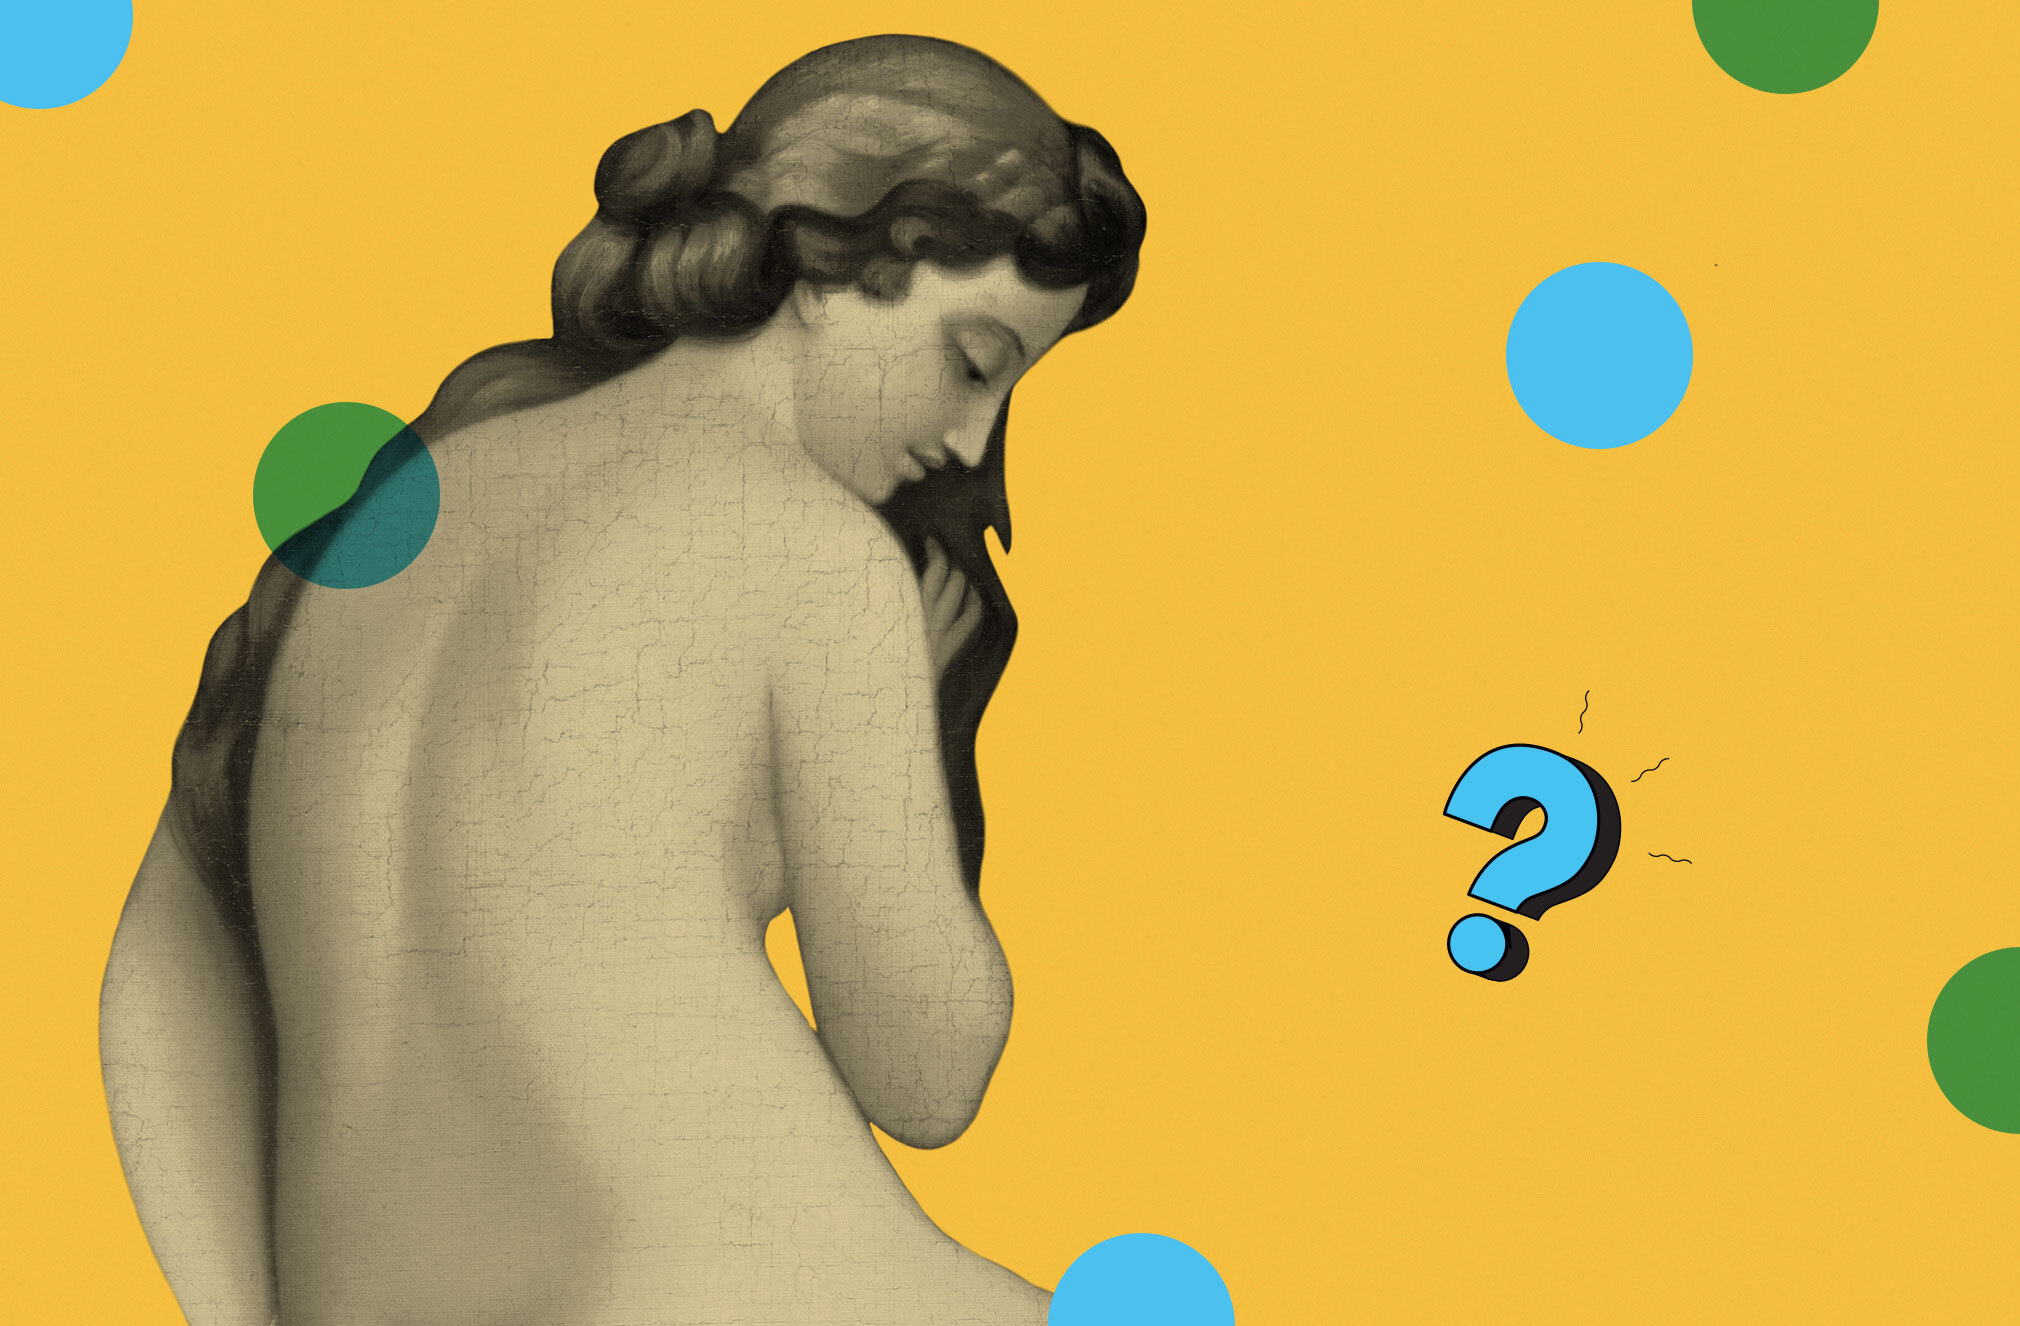 How can you safely send nudes? | Popular Science